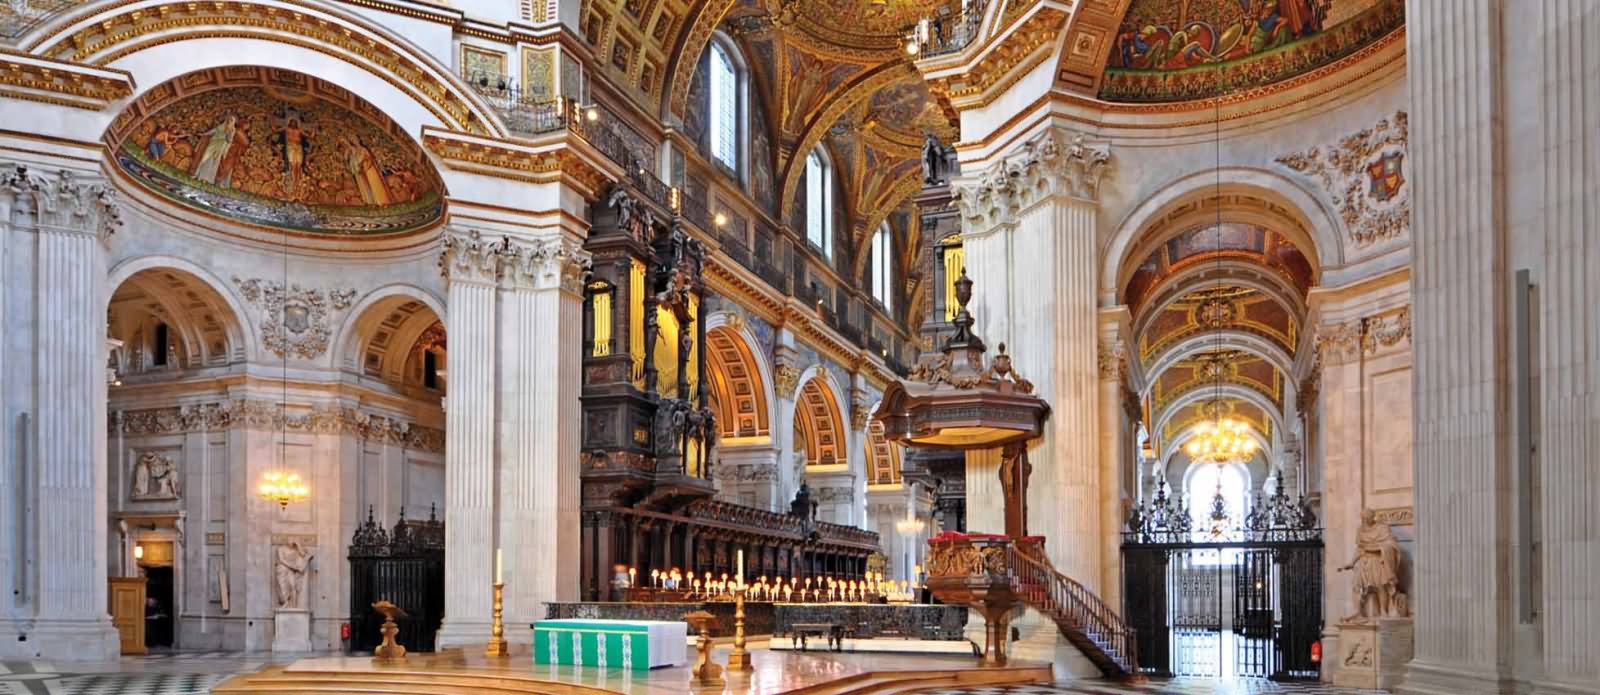 Interior View Of The St Paul's Cathedral